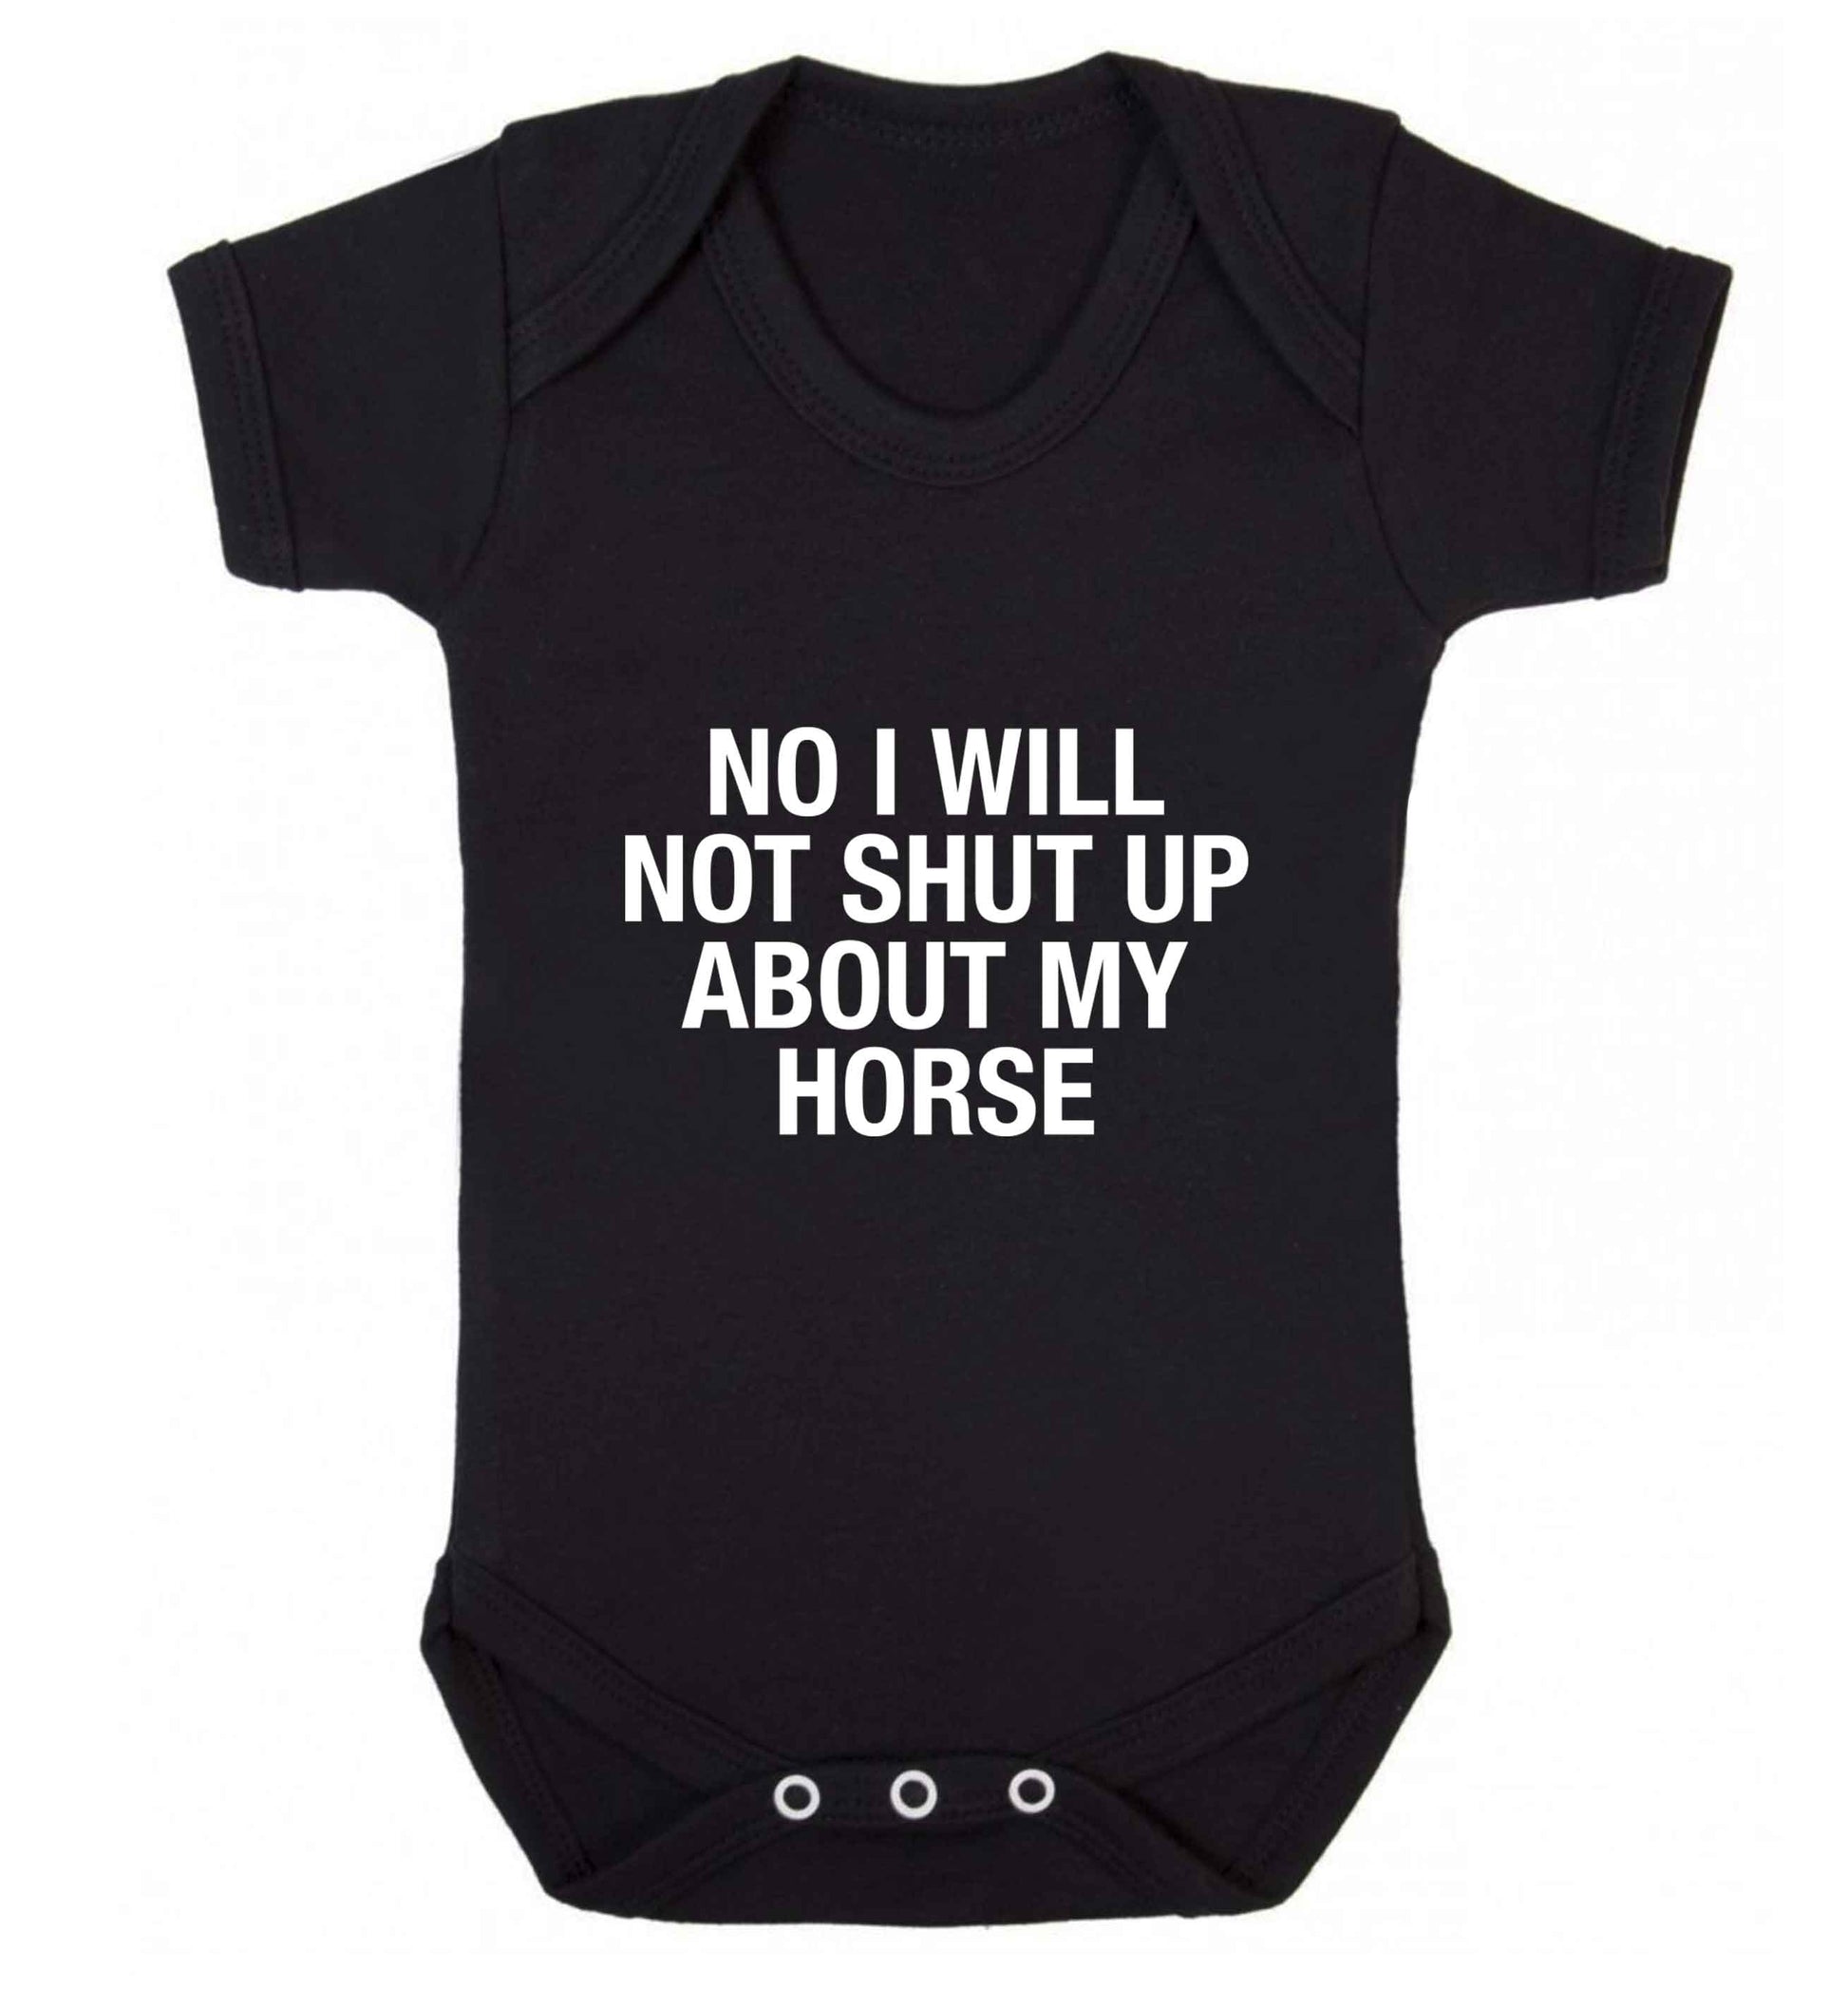 No I will not shut up talking about my horse baby vest black 18-24 months